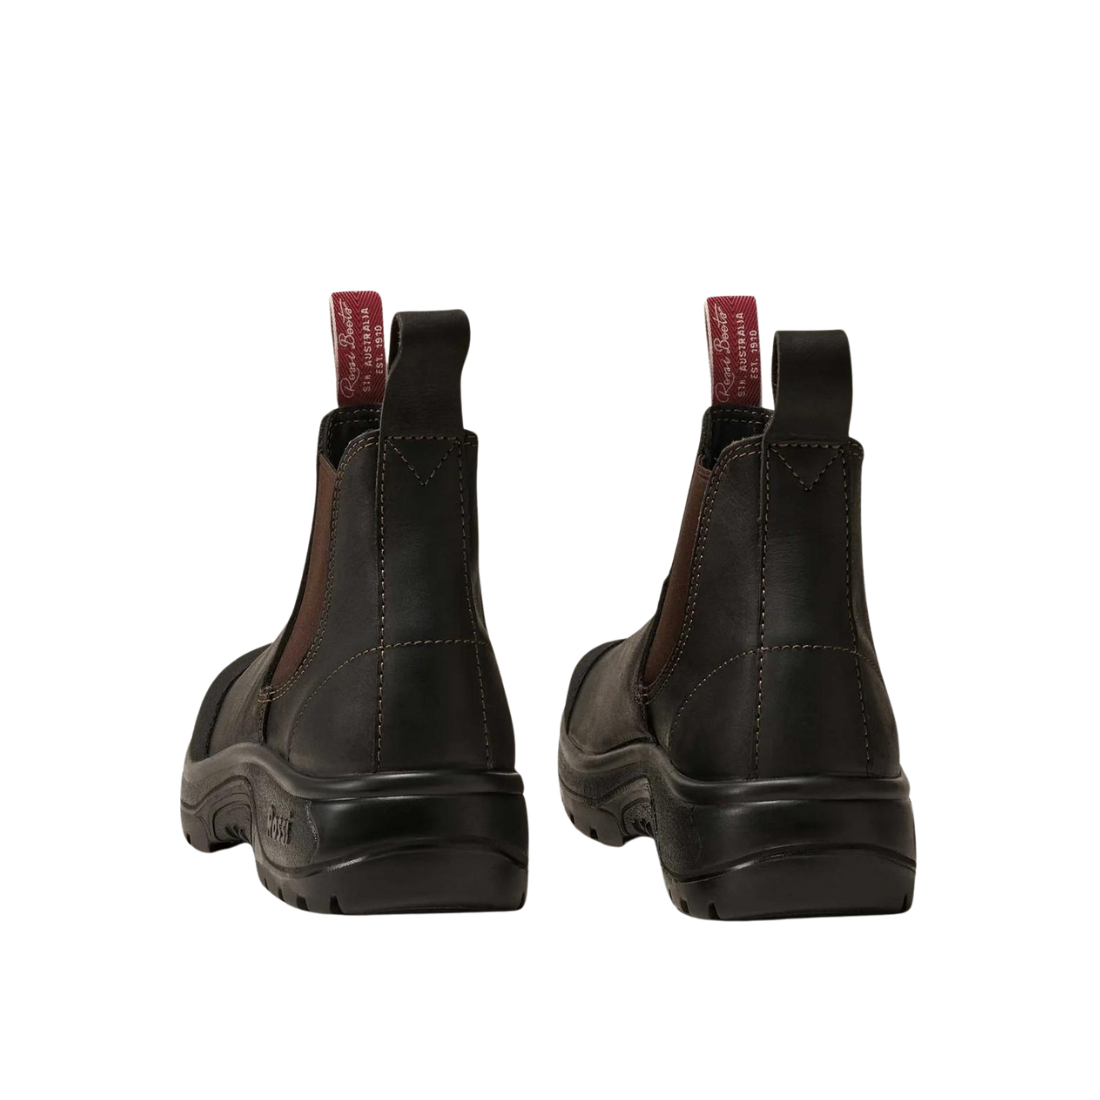 Rossi 795 Hercules Safety Pull-on Workboot Claret Workboots by Rossi | The Bloke Shop